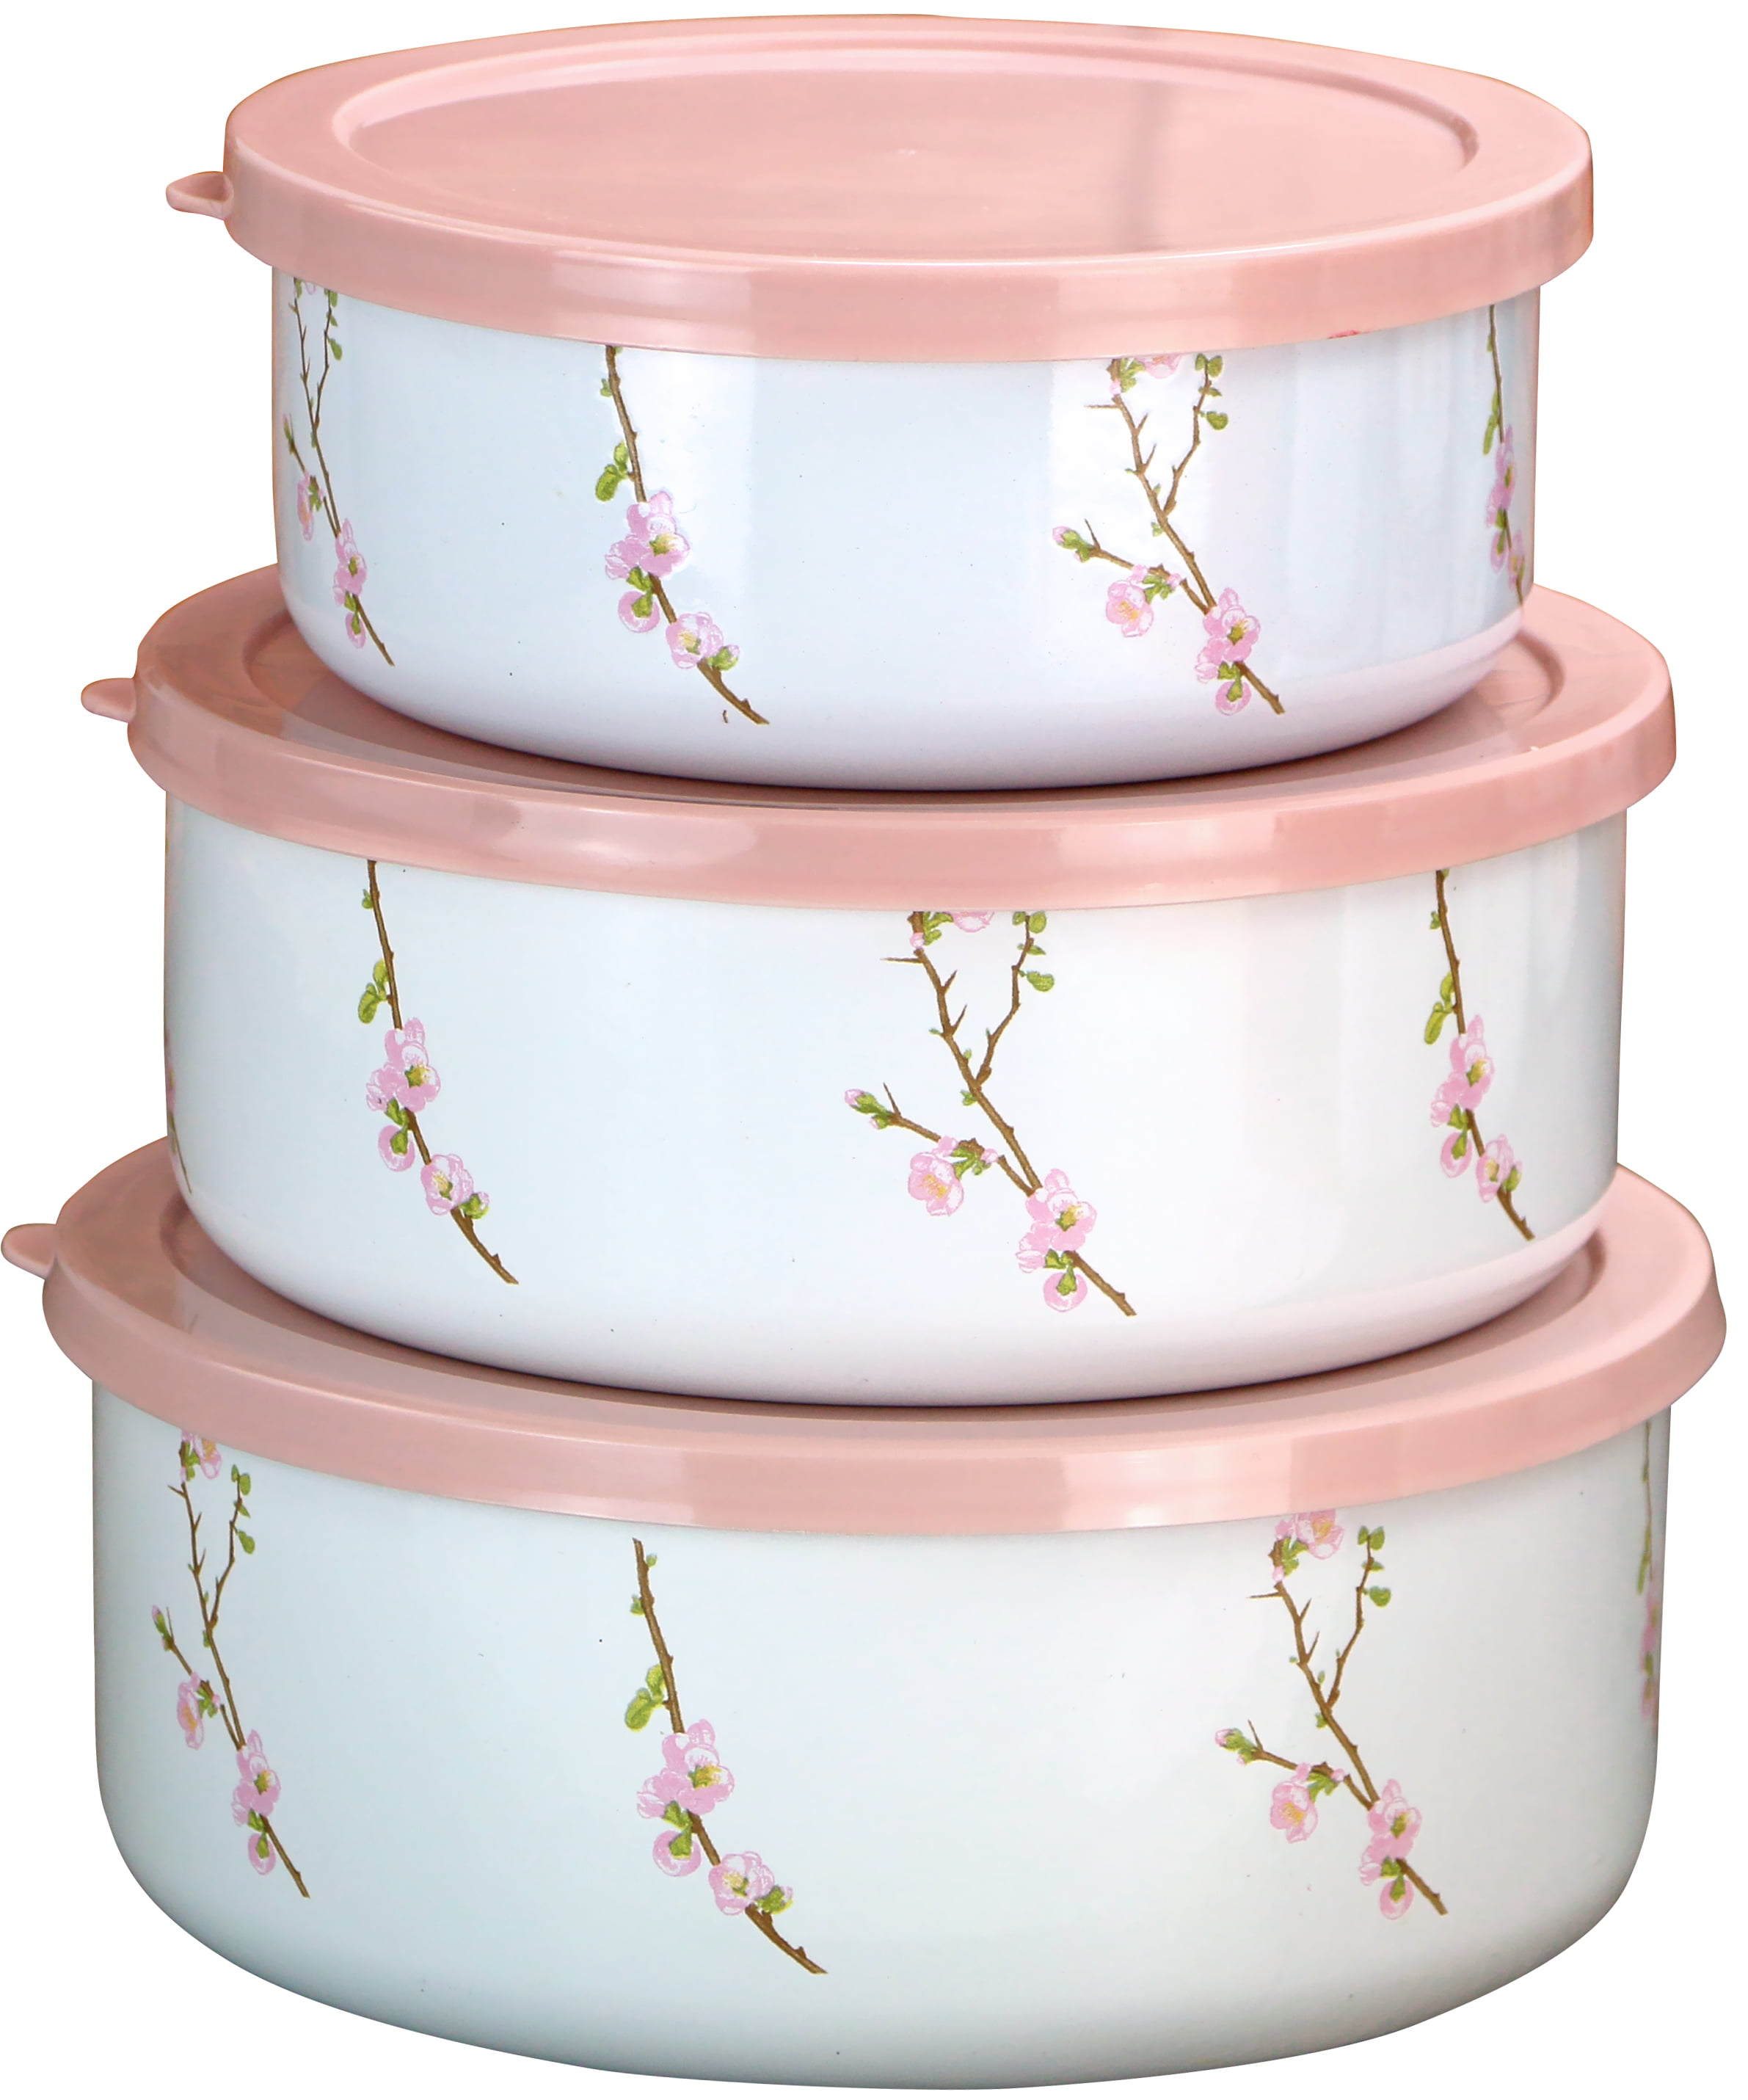 Details about   CHERRY BLOSSOM Melamine Bowl  SET OF 4 NEW 8'' ROUND 